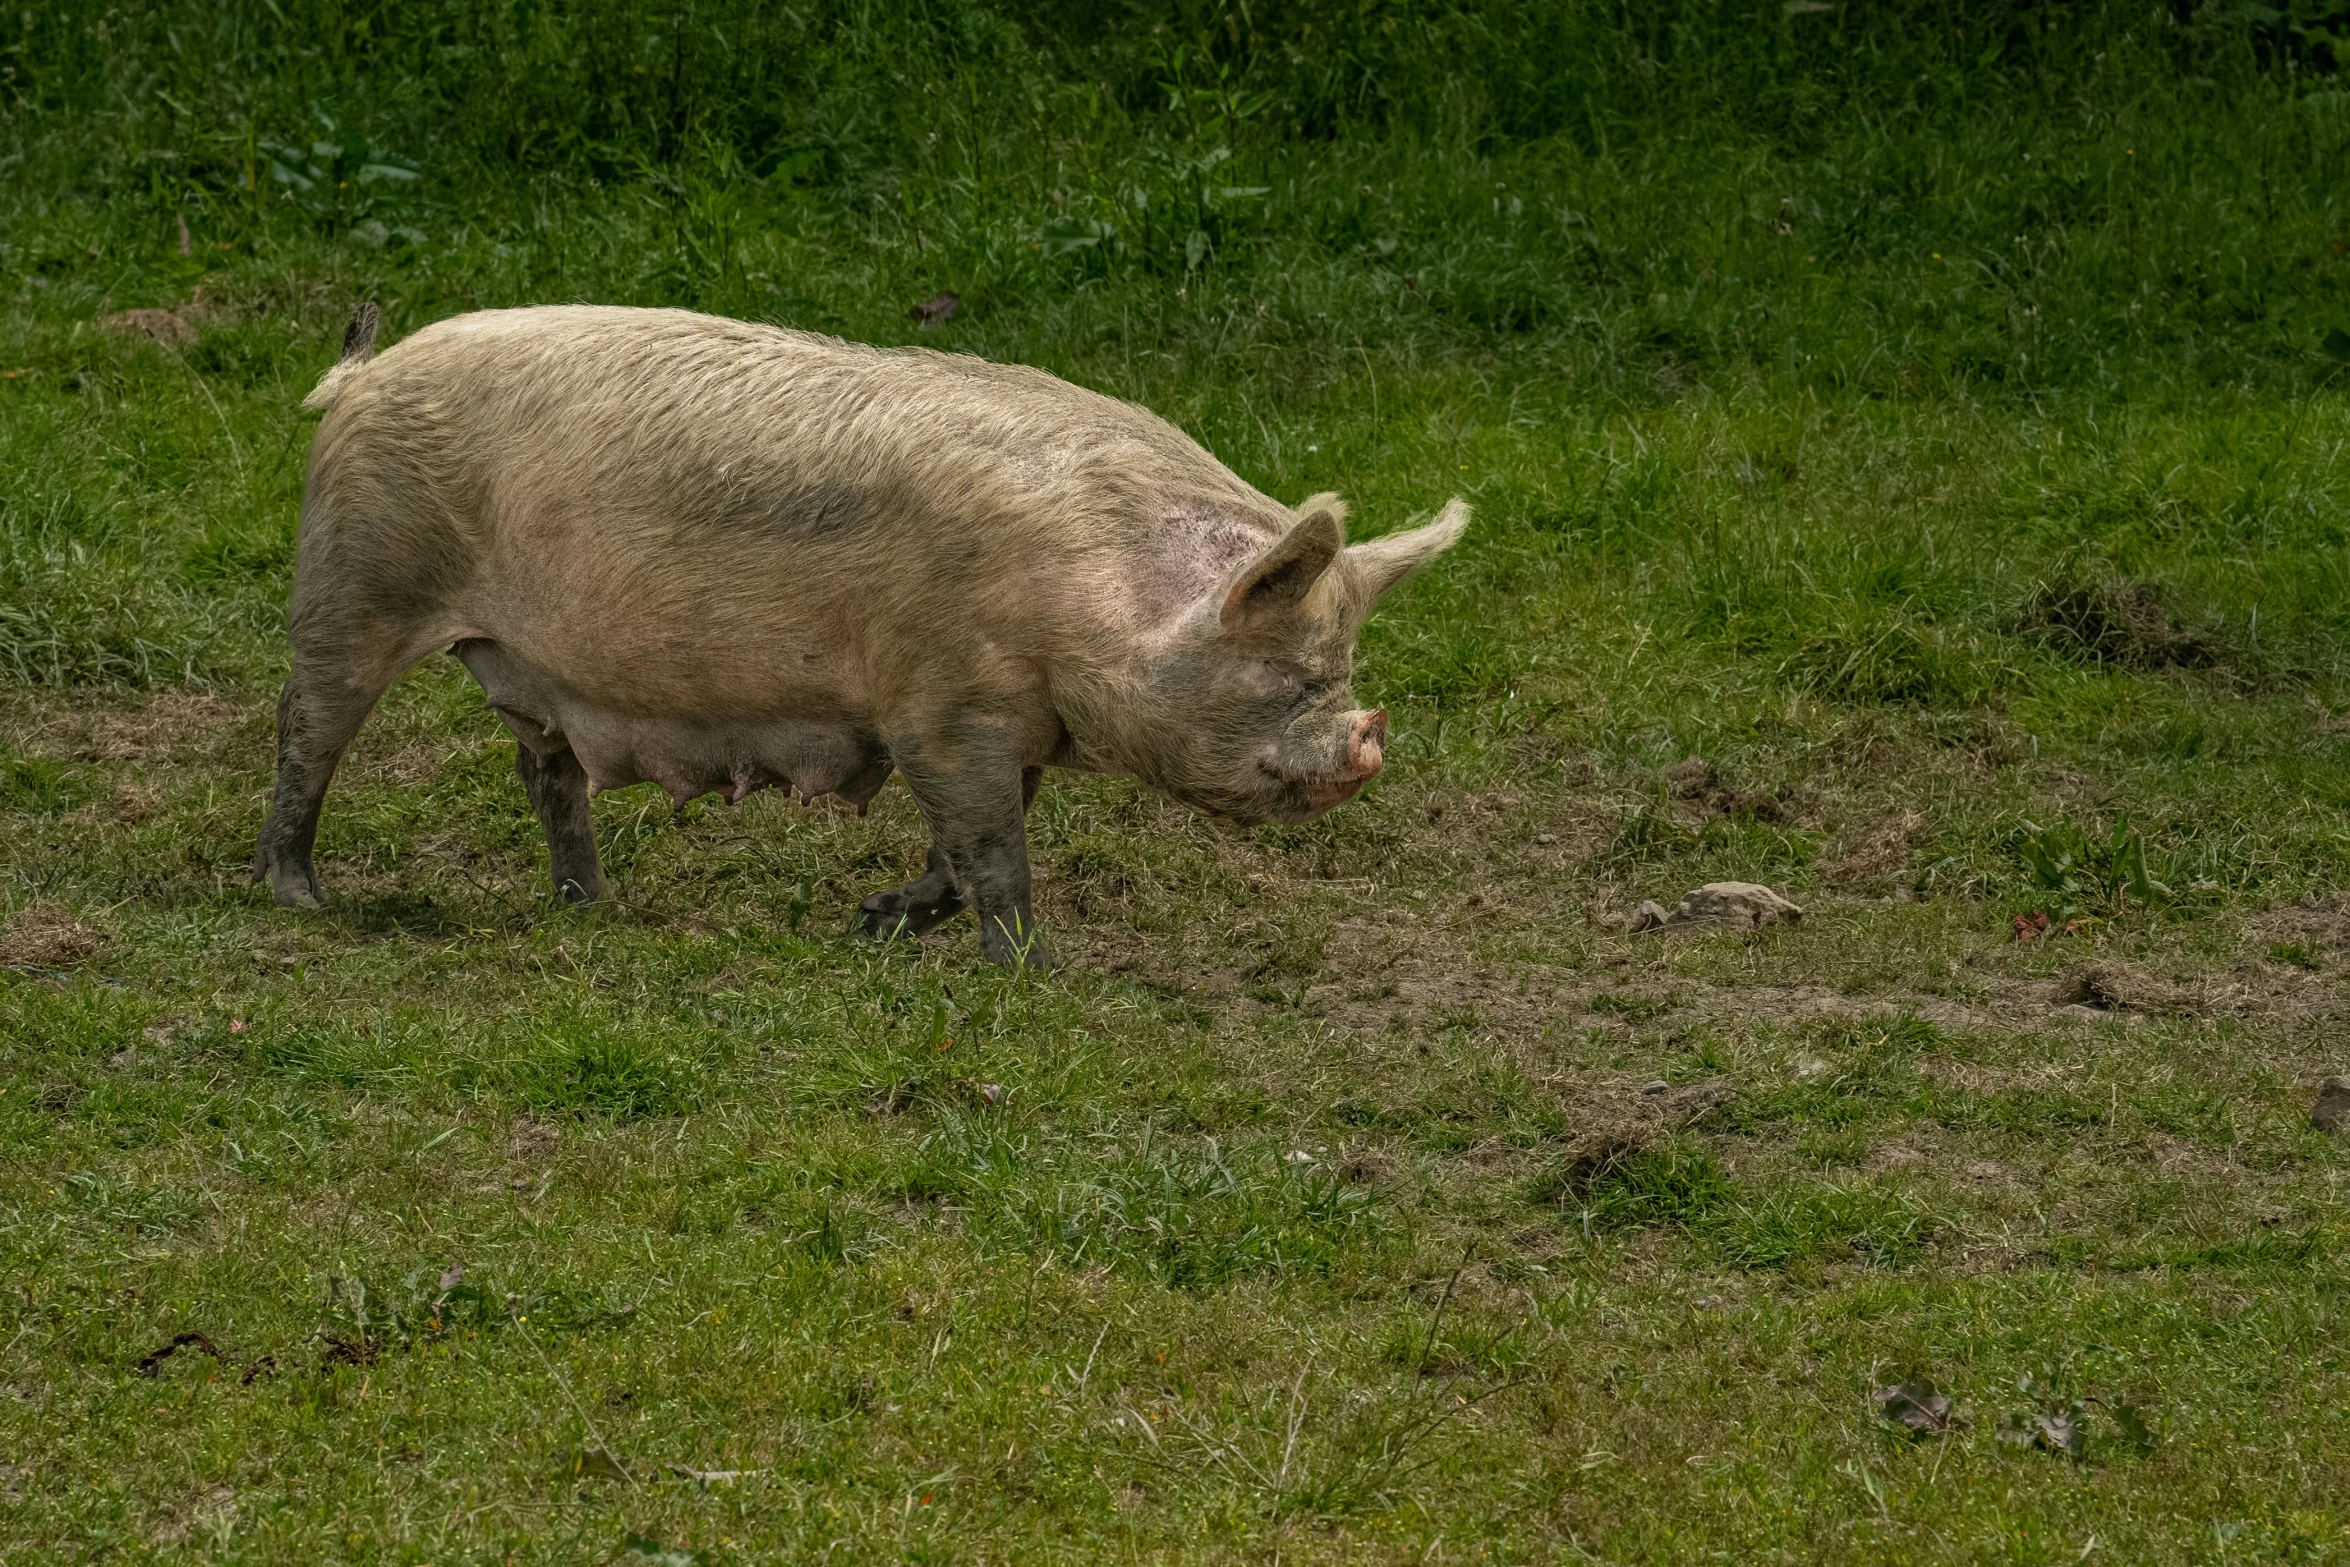 a small pig standing on a lush green field